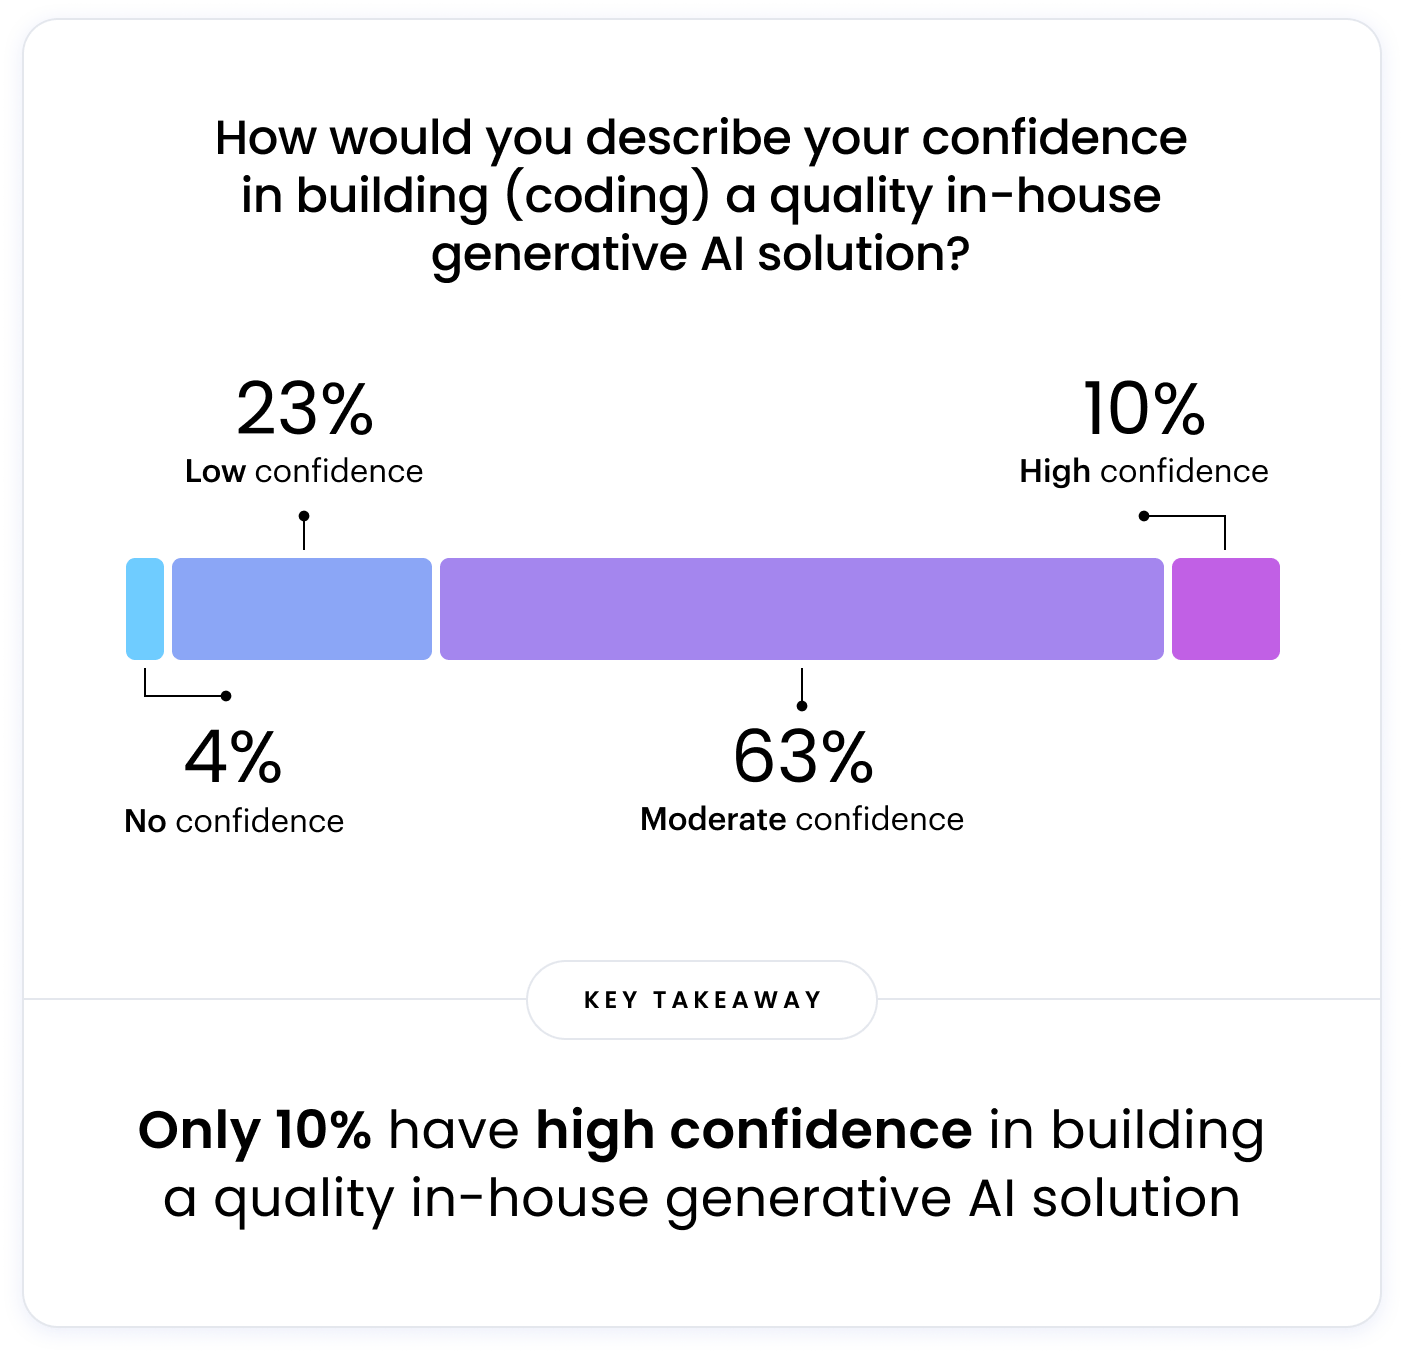 This image depicts a chart labeled "How would you describe your confidence in building (coding) a quality in-house generative AI solution?". The chart is divided into four categories: "High confidence" (10%), "Moderate confidence" (63%), "Low confidence" (23%), and "No confidence" (4%). The most striking finding is that only 10% of respondents are highly confident in building a quality in-house generative AI solution.